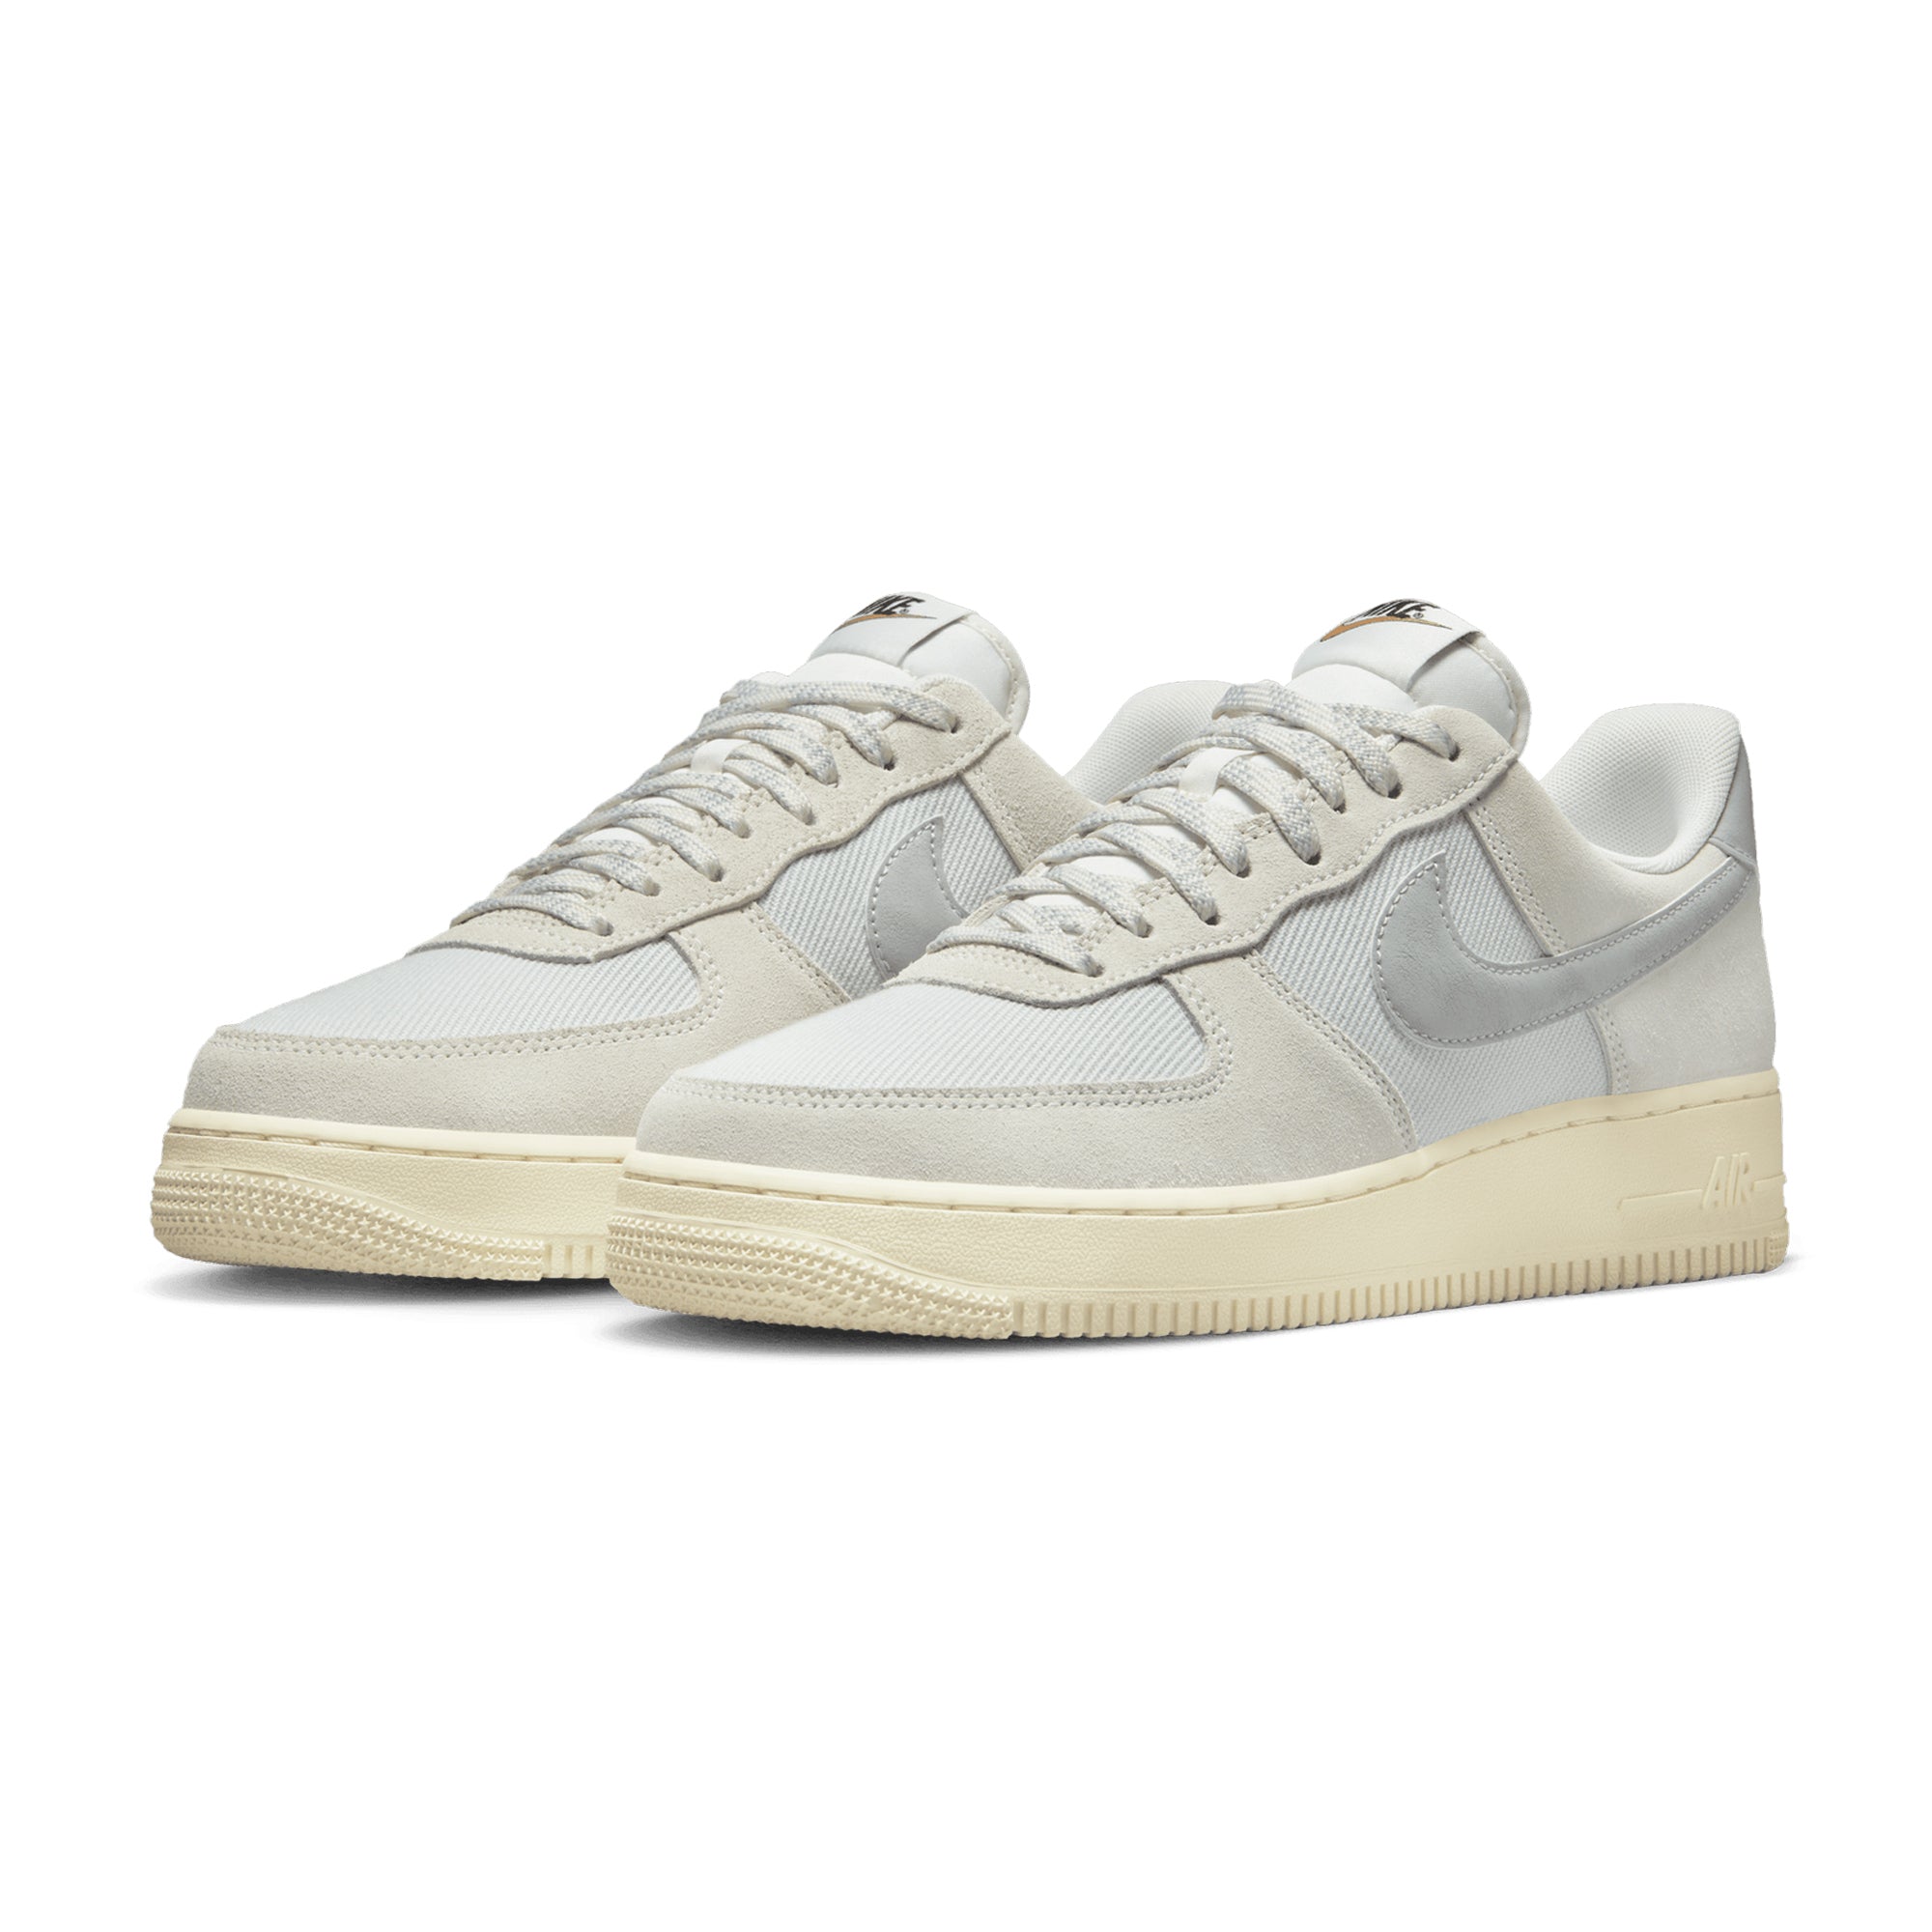 Nike Air Force 1 Low Suede Top Shoes